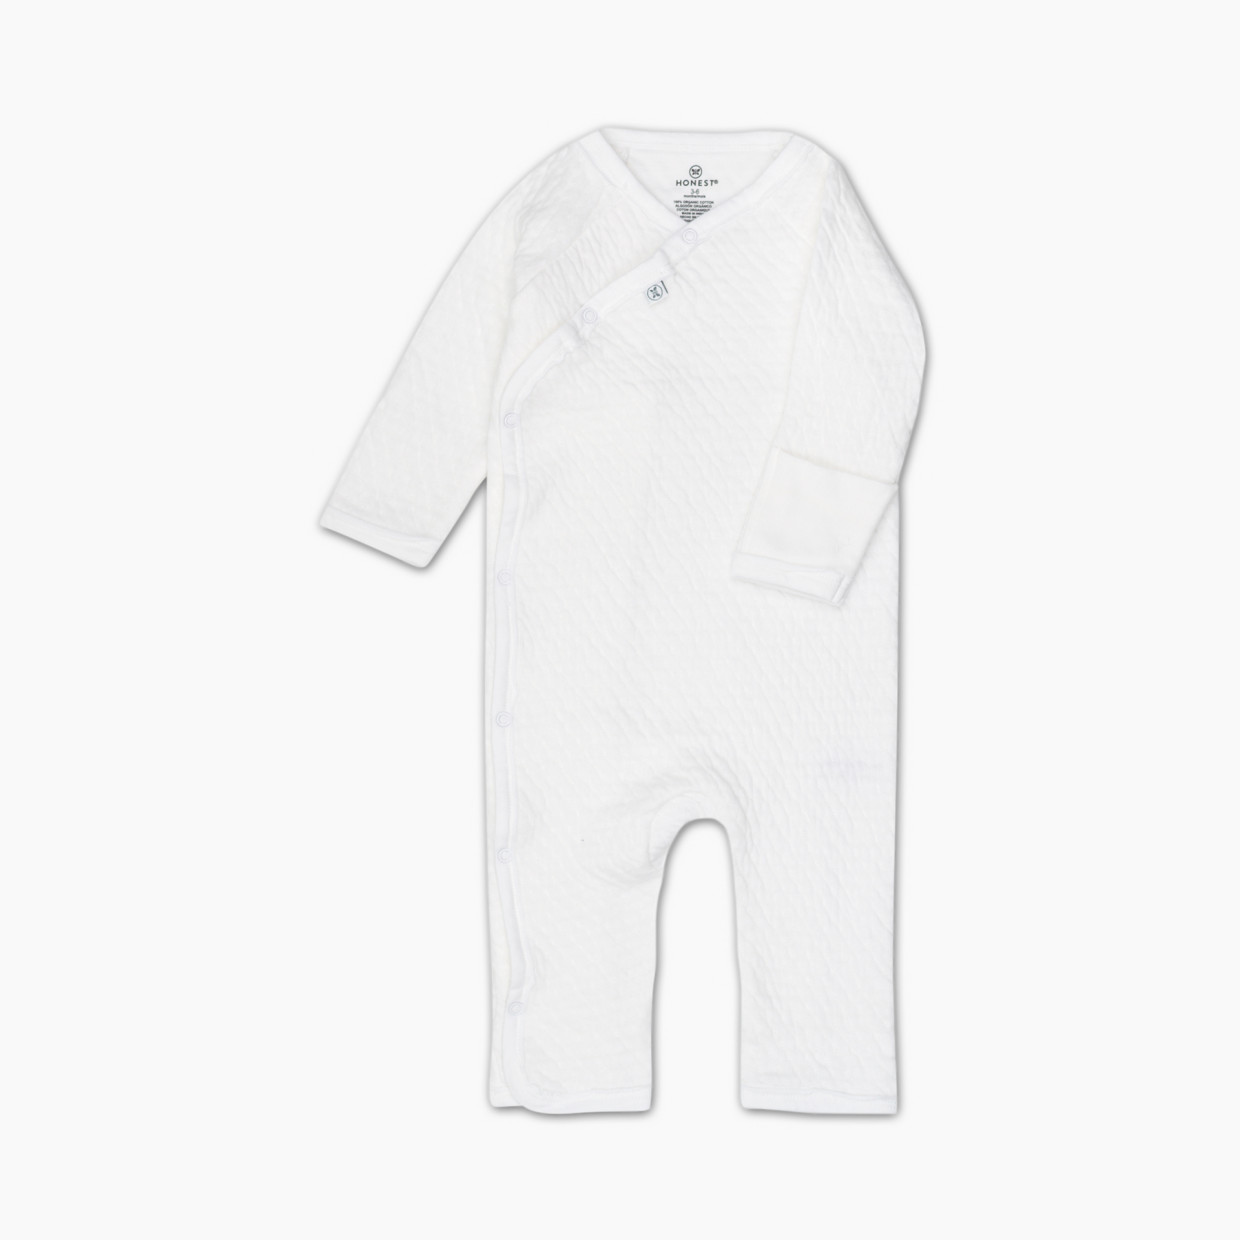 Honest Baby Clothing Organic Cotton Matelasse Side Snap Coverall - Bright White, 6-9 M.